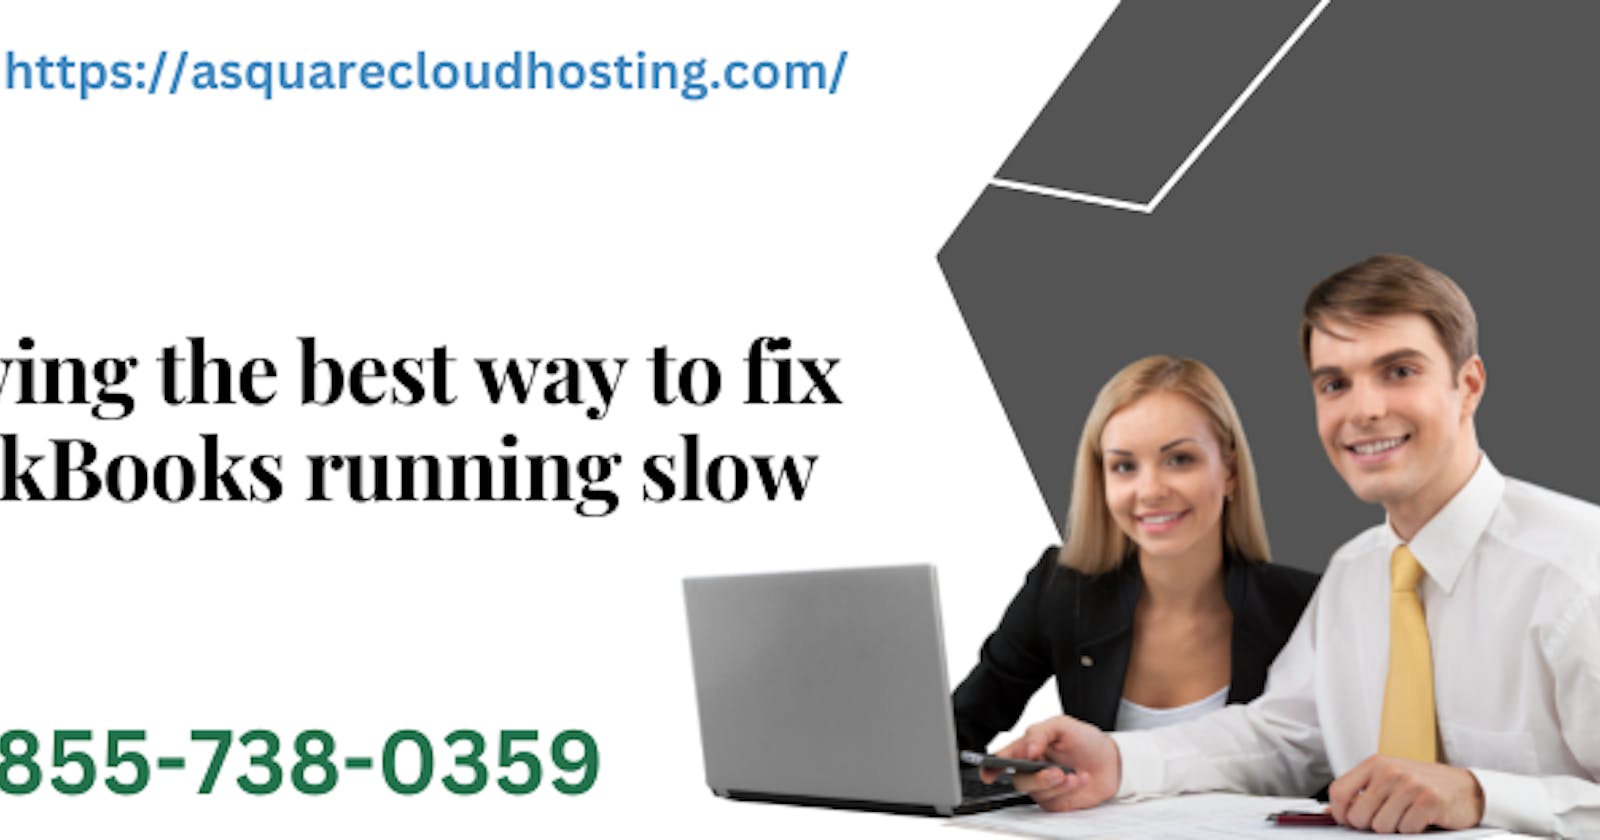 Knowing the best way to fix Quickbooks running slow